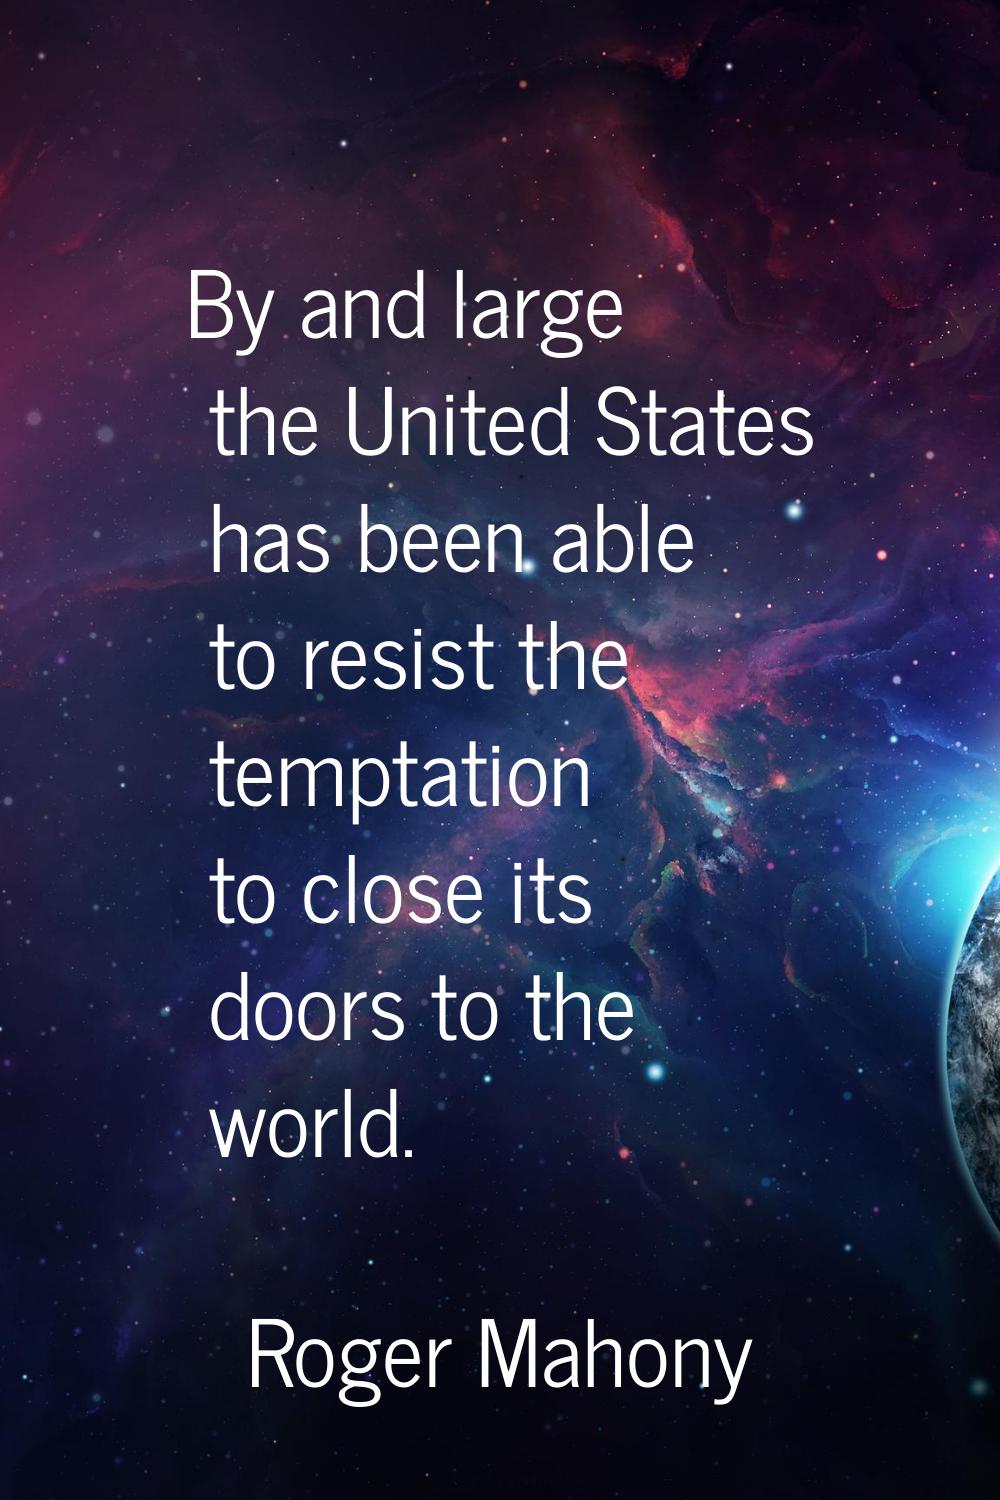 By and large the United States has been able to resist the temptation to close its doors to the wor